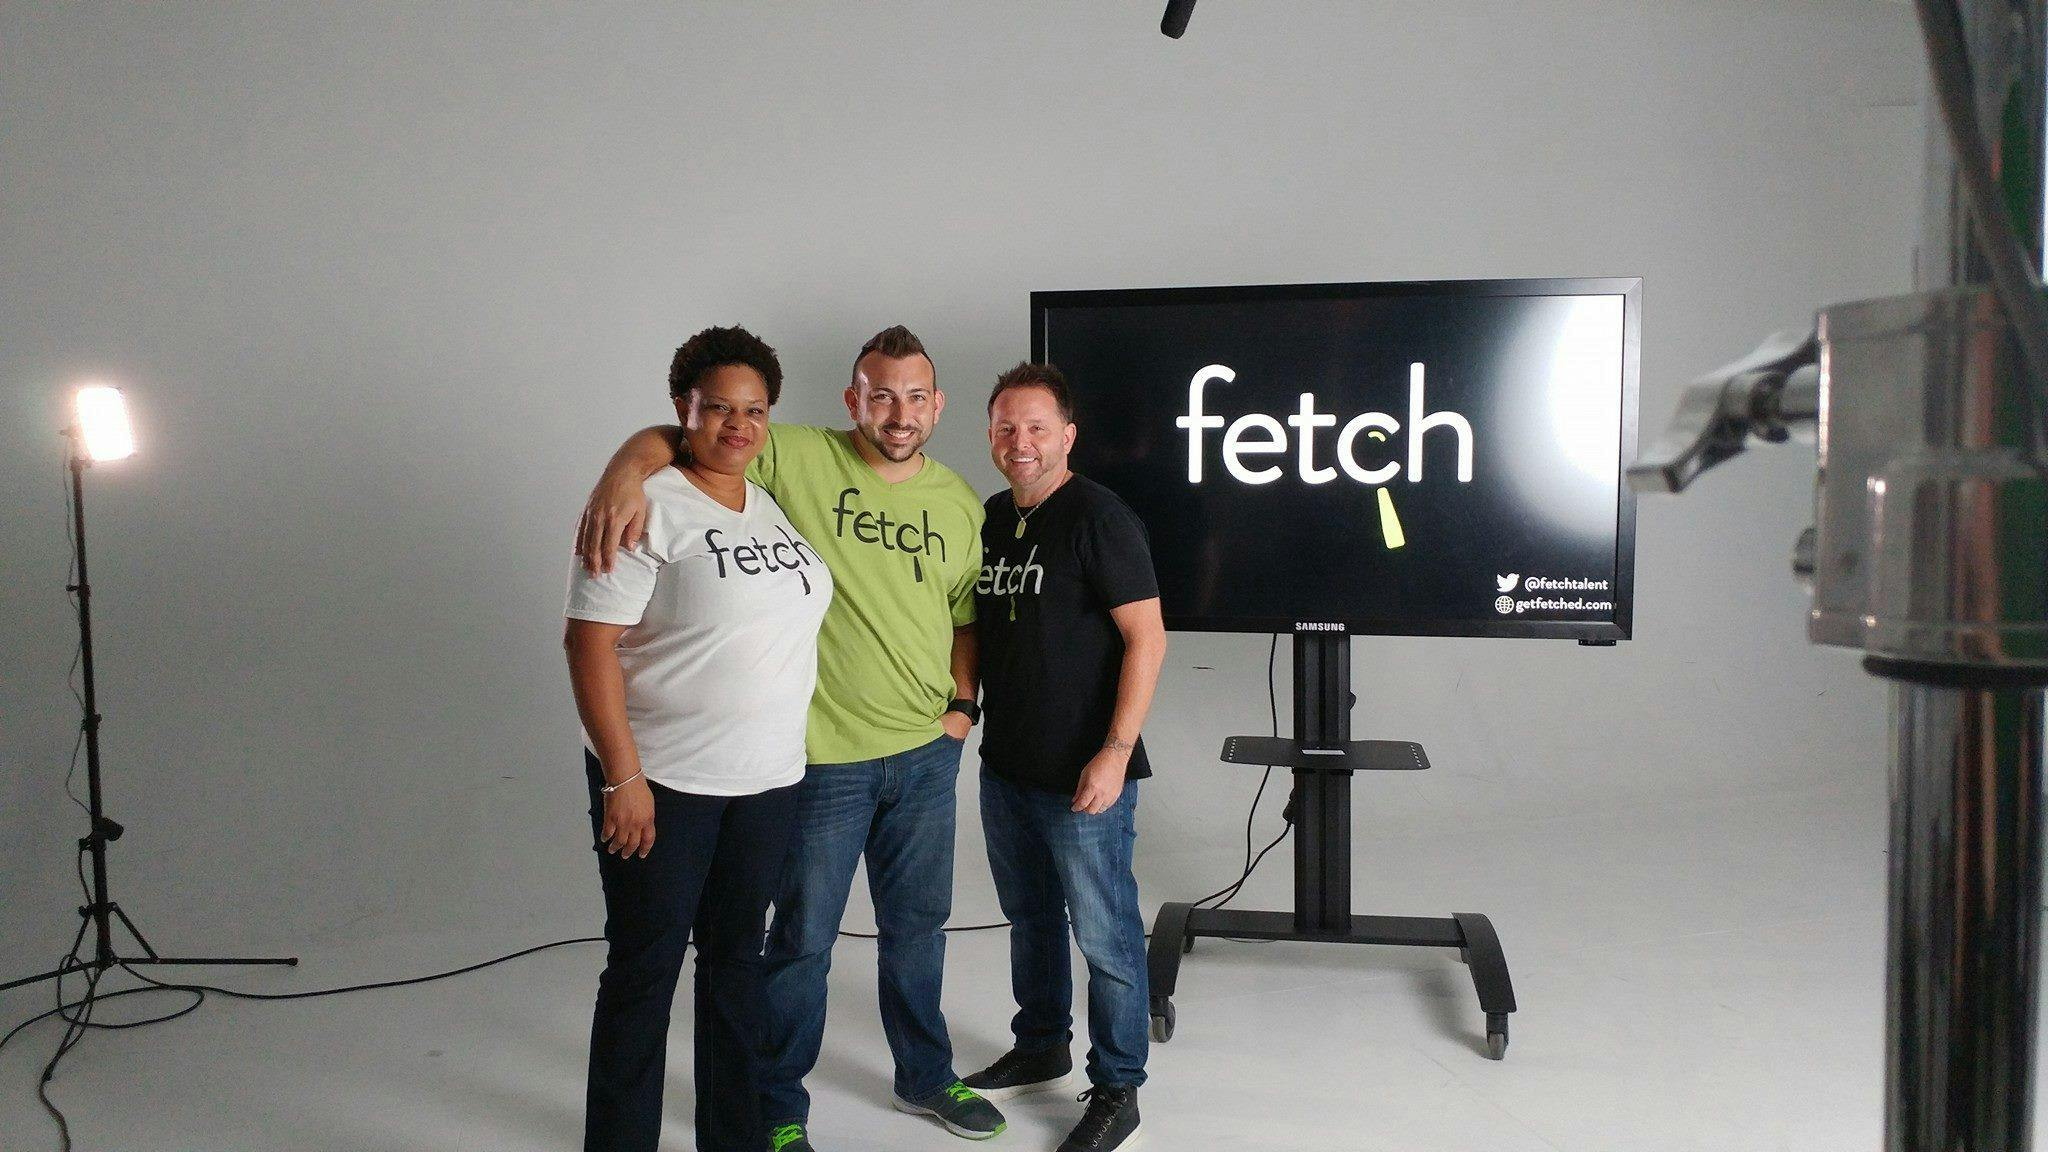 Addressing Founders’ Poor Behavior - Chase Morrow of Fetch